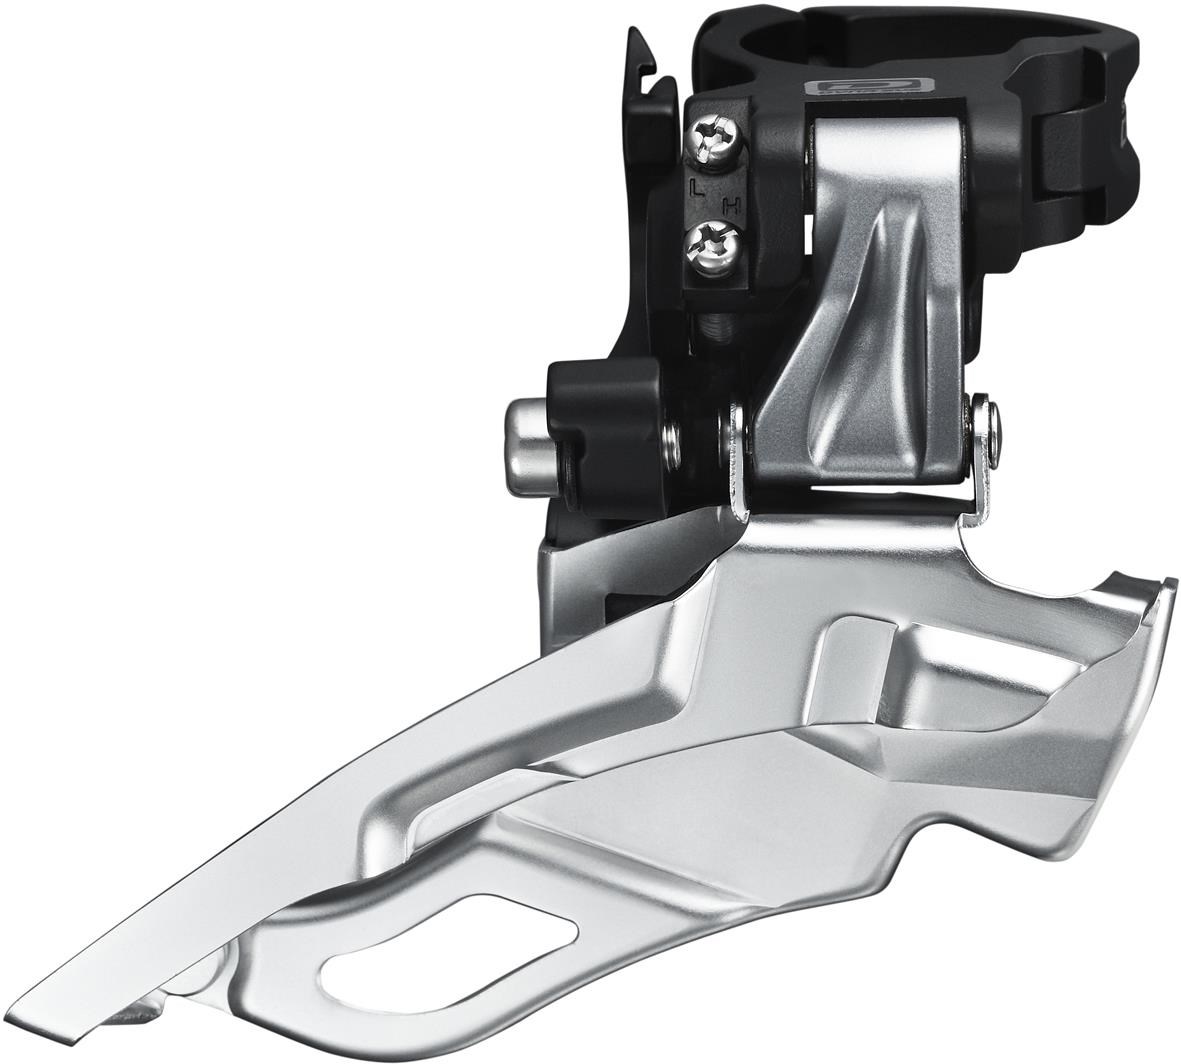 Shimano FD-M611 Deore 10-Speed Triple Front Derailleur - Conventional Swing - Top-Pull product image